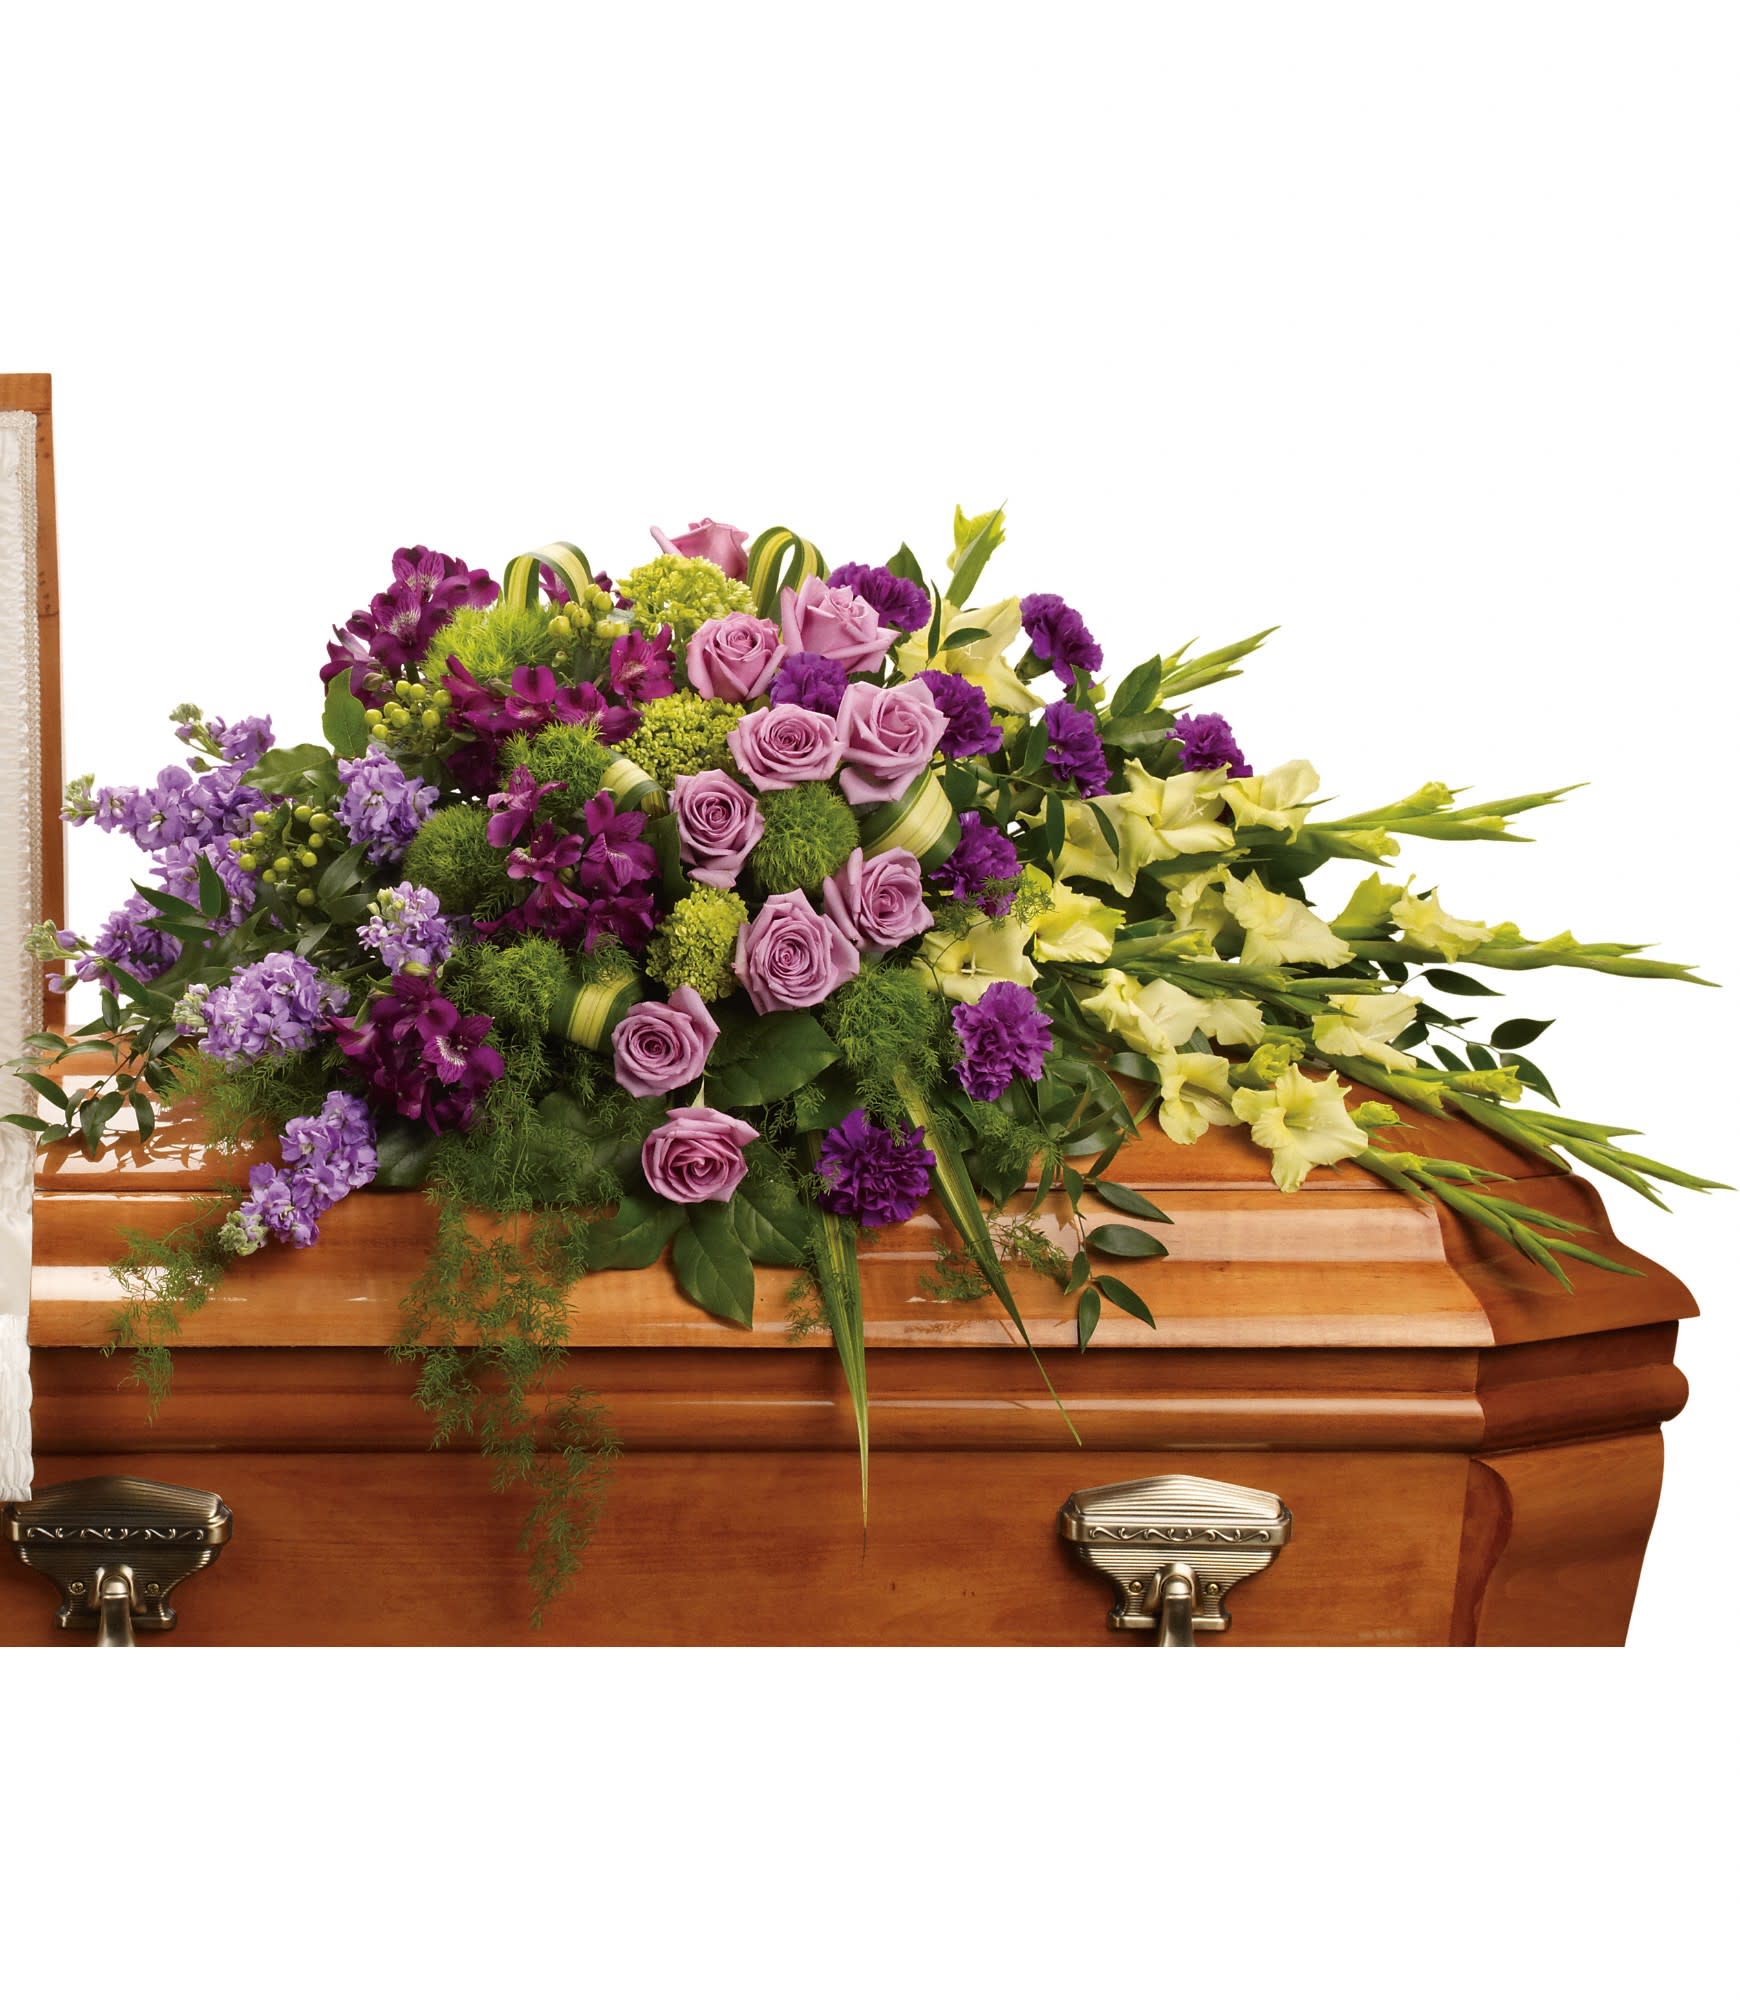 Reflections of Gratitude Casket Spray (T268-3A) - Devotion is beautifully expressed with lavender roses, purple alstroemeria and other favorites artistically arranged and placed on top of the casket. 